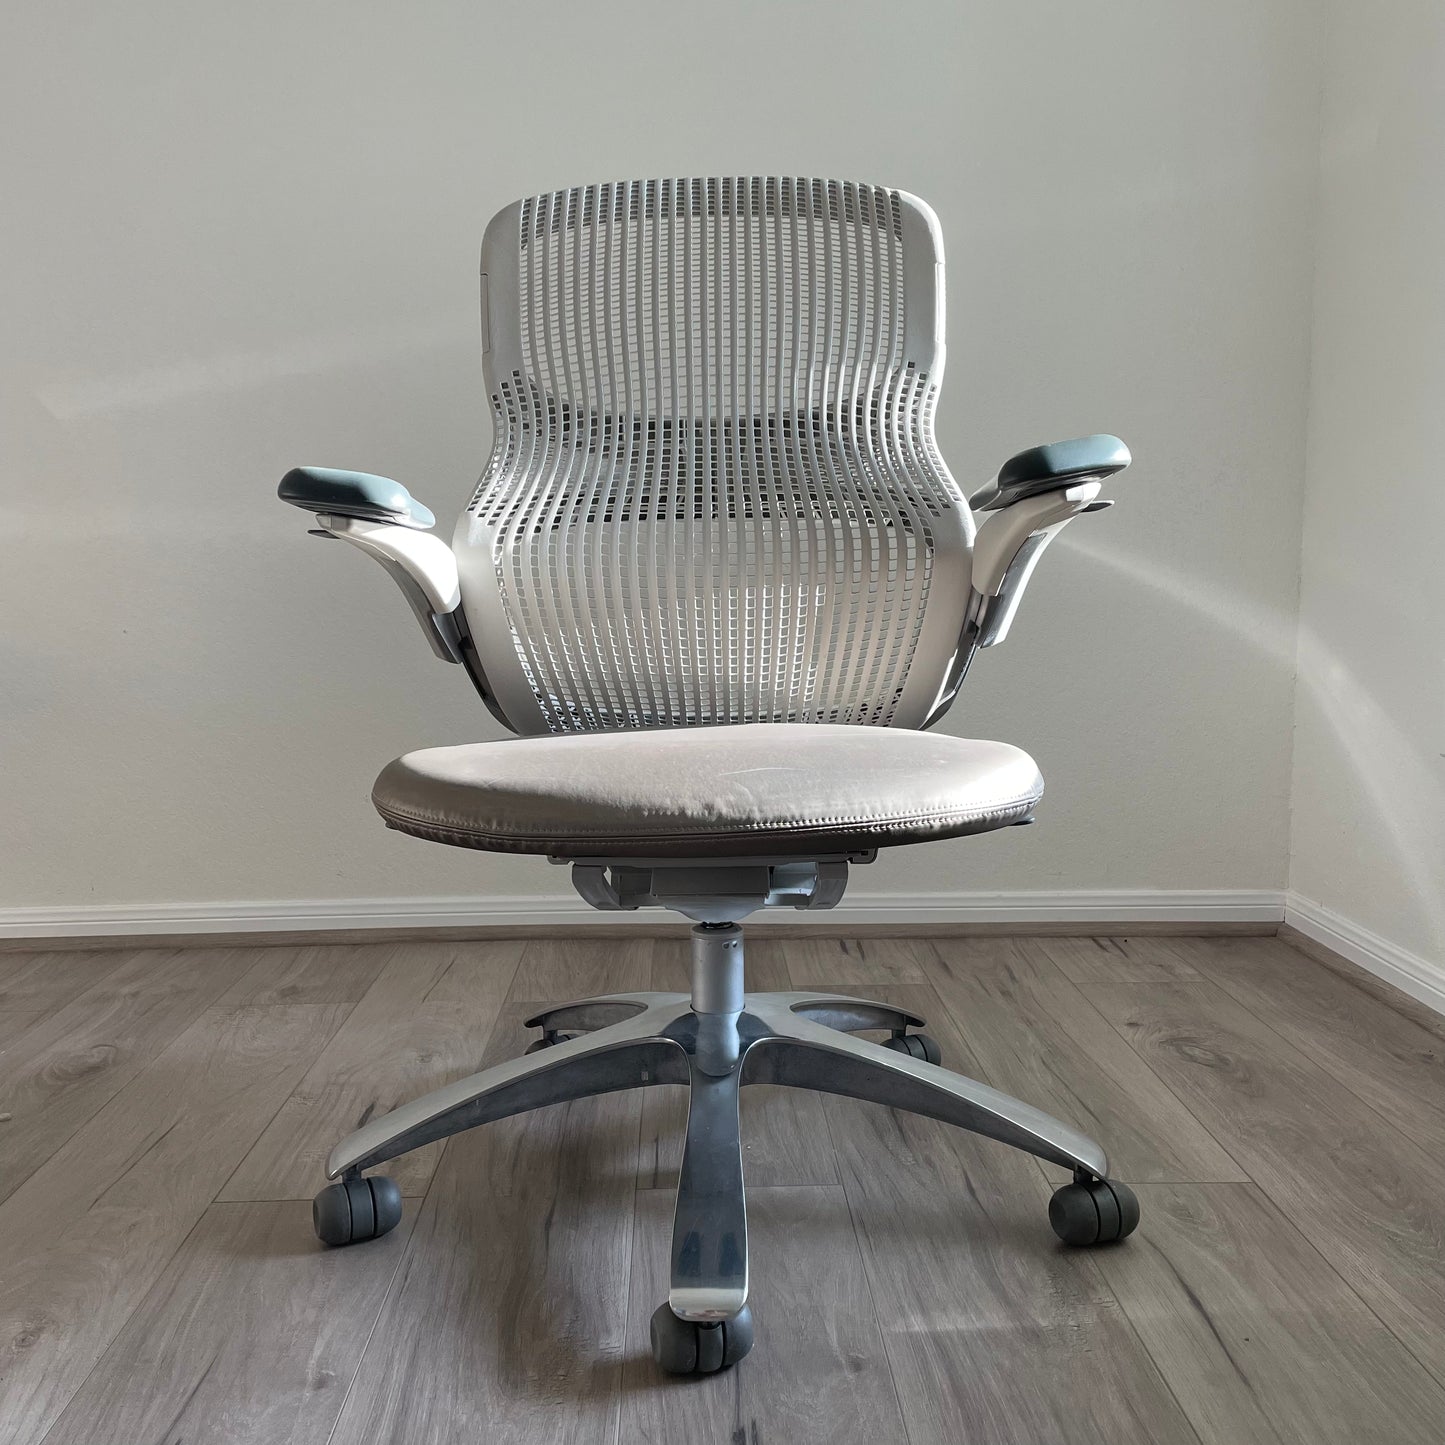 Light Knoll Generation Office Chair : See Shipping Rules